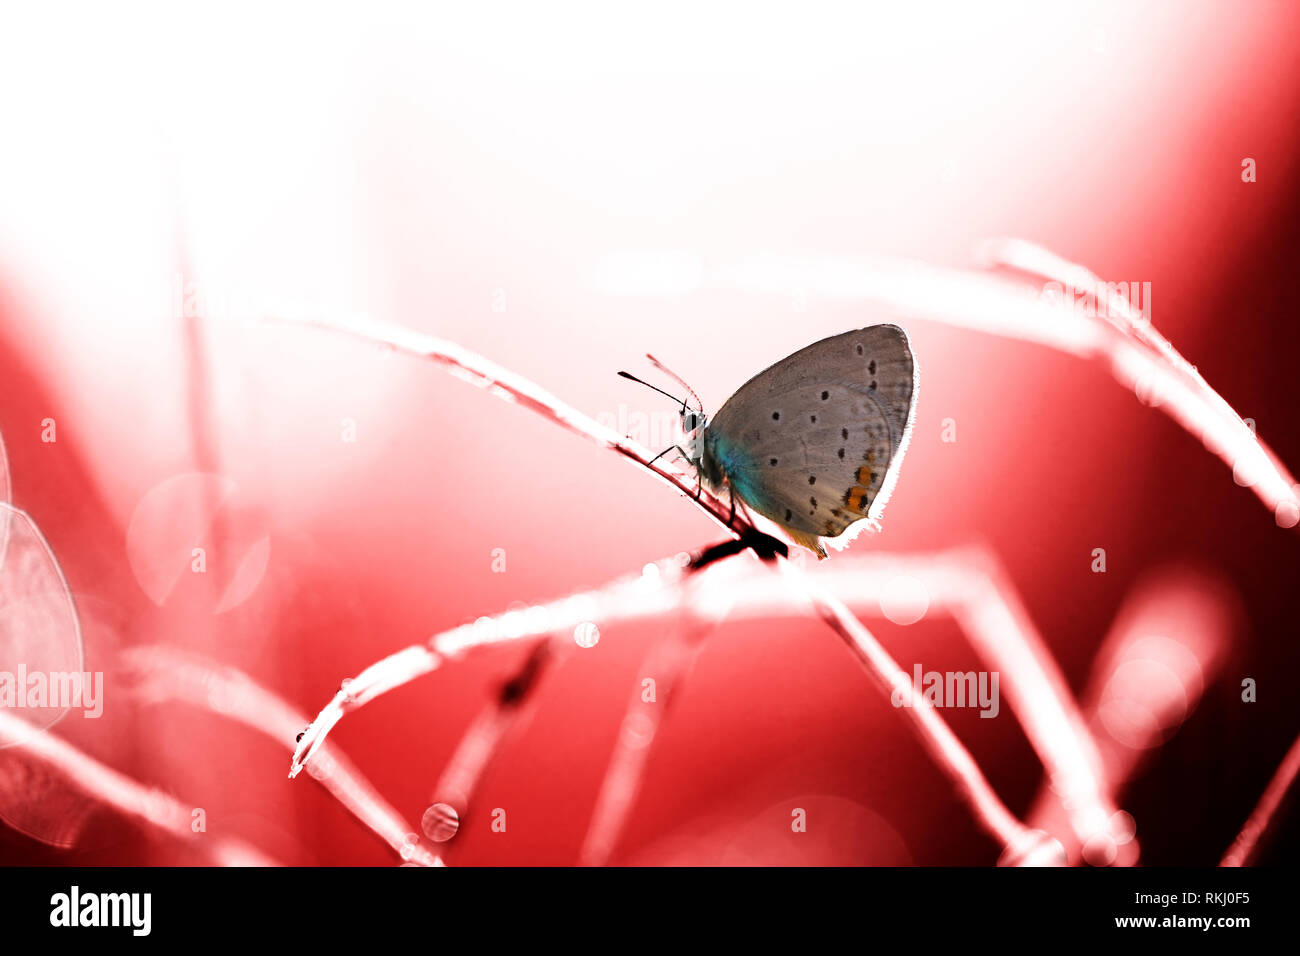 A beautiful butterfly on an orange background, sitting and resting. Stock Photo